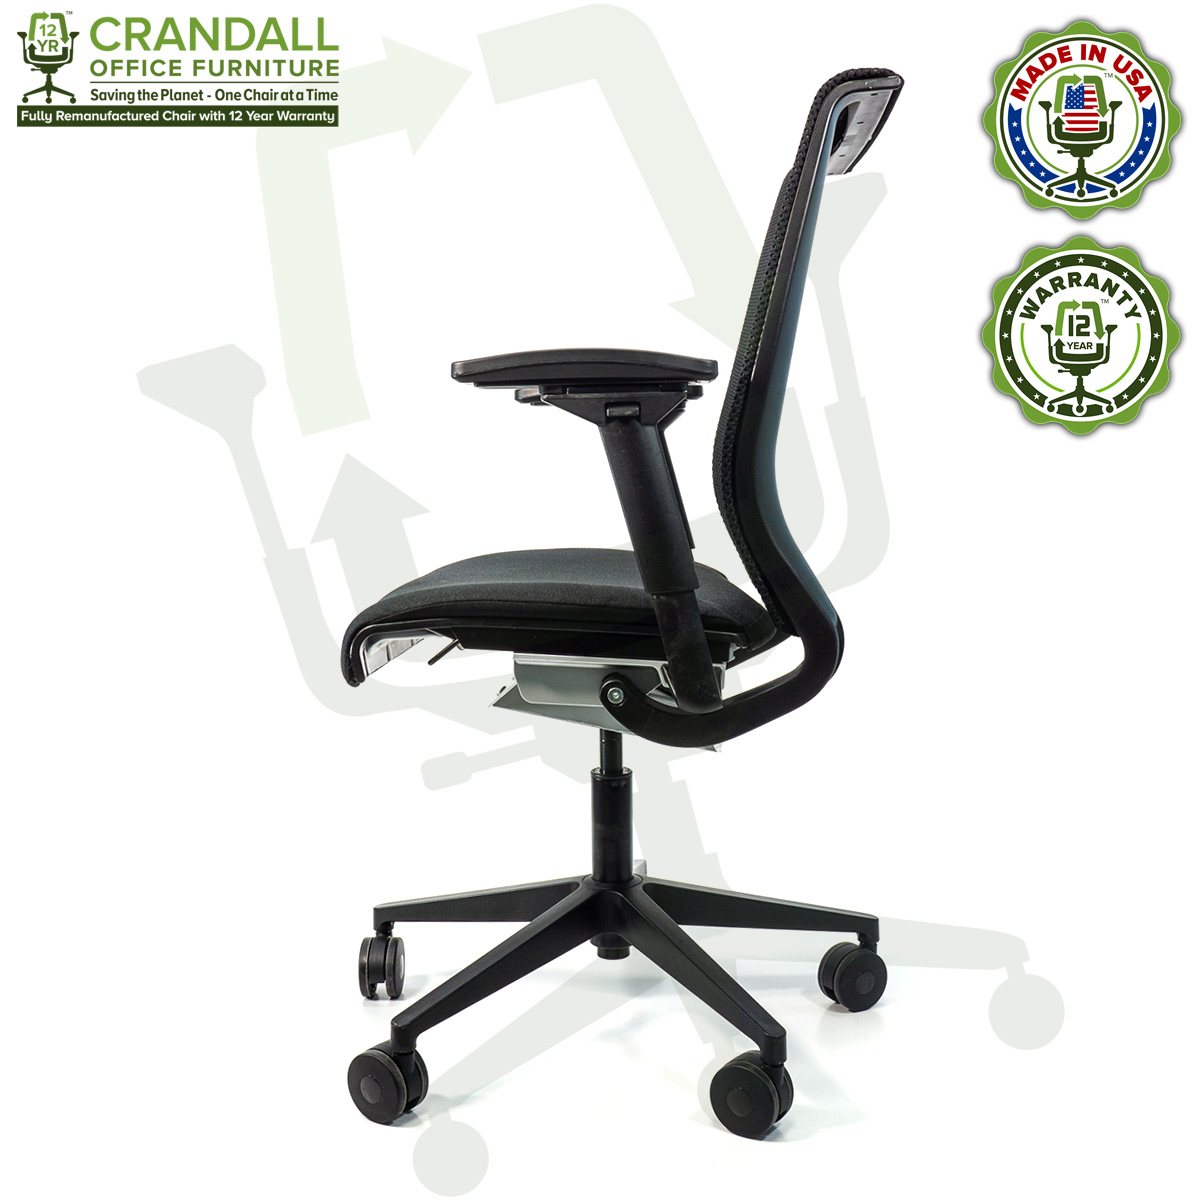 Crandall Office Furniture Remanufactured Steelcase Think Chair with 12 Year Warranty - 03